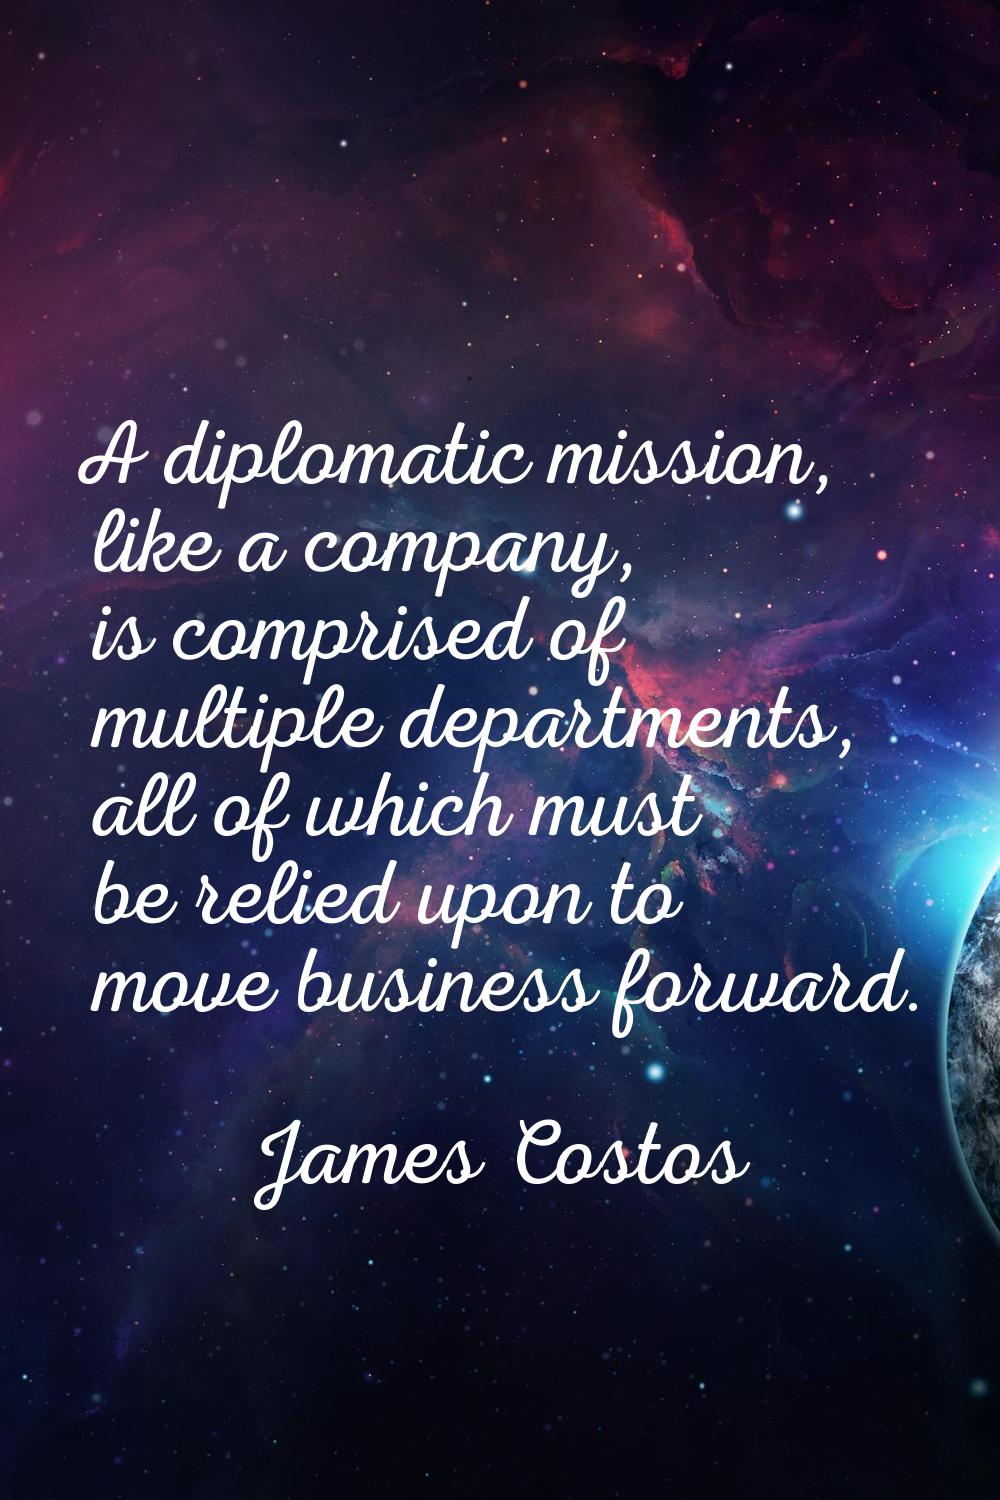 A diplomatic mission, like a company, is comprised of multiple departments, all of which must be re